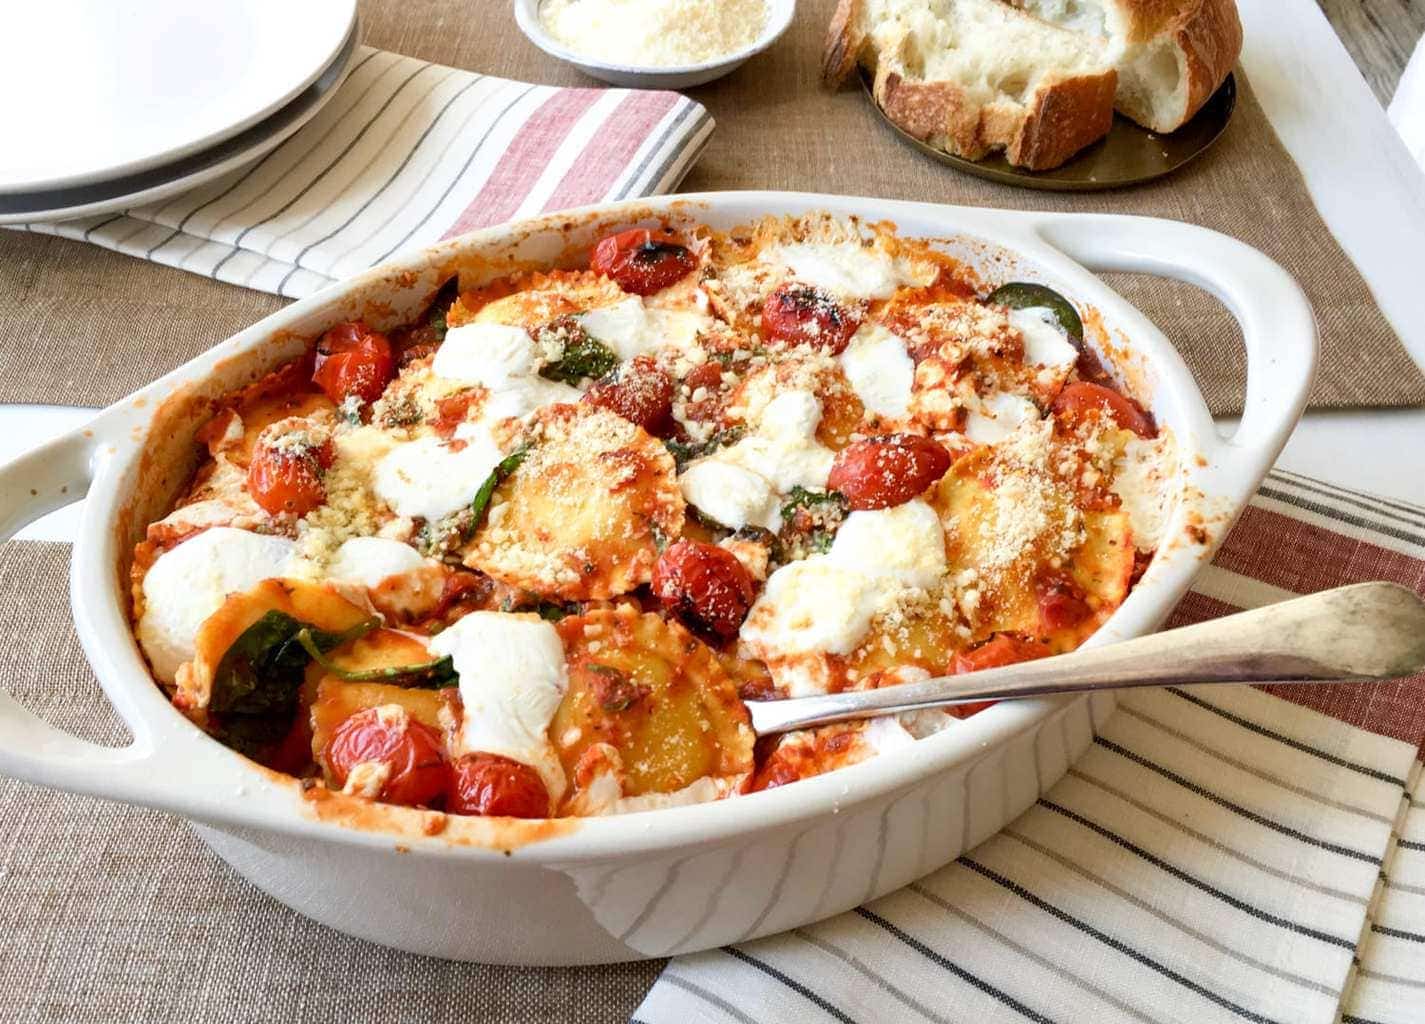 ravioli bake with fresh tomatoes and spinach in a casserole dish